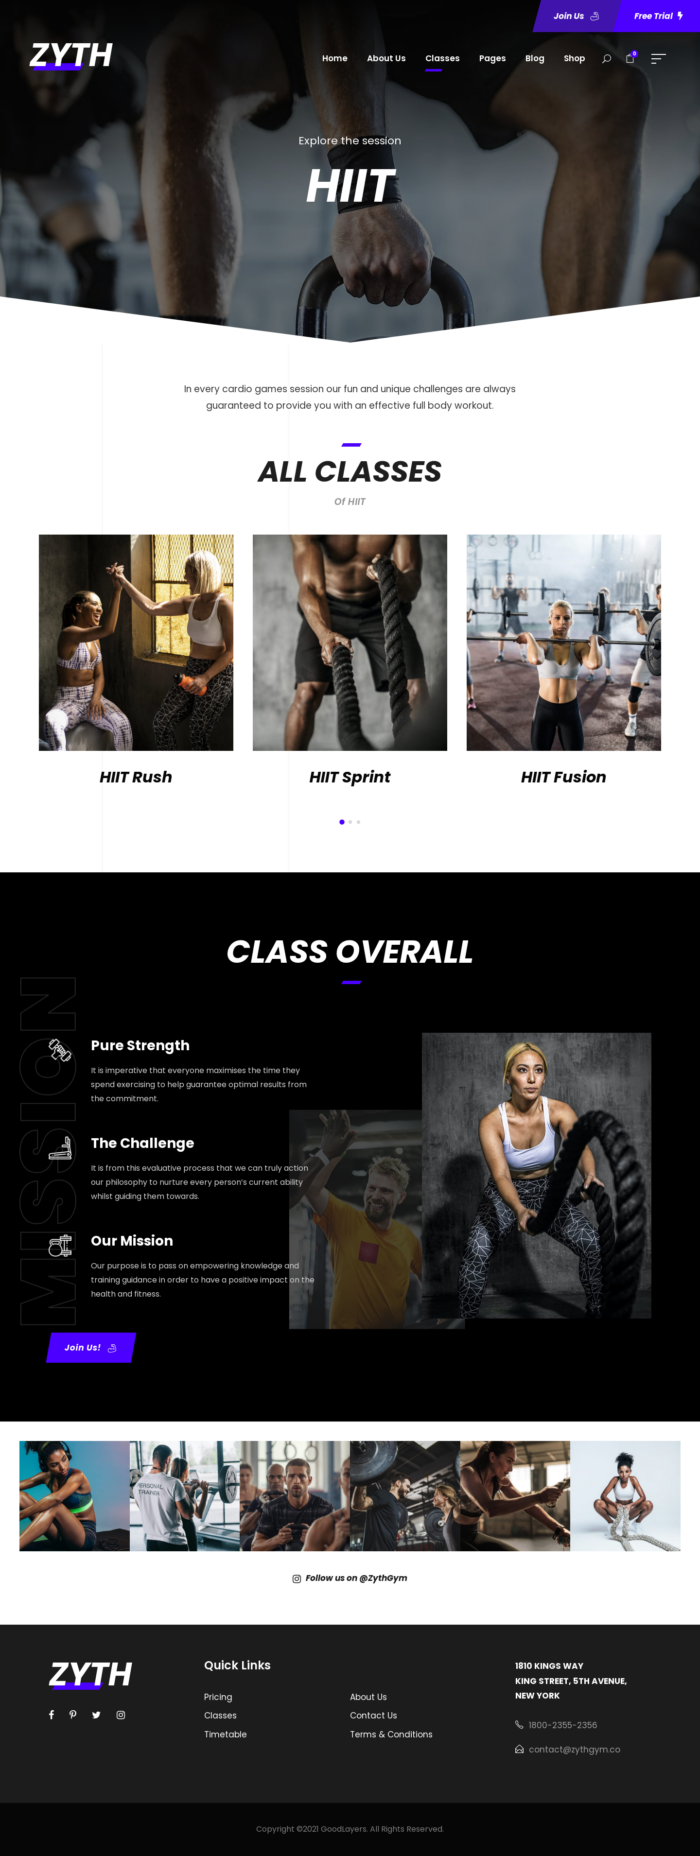 Mau Giao Dien Website Phong Gym Zyth Pc 1 - Web Speed Up